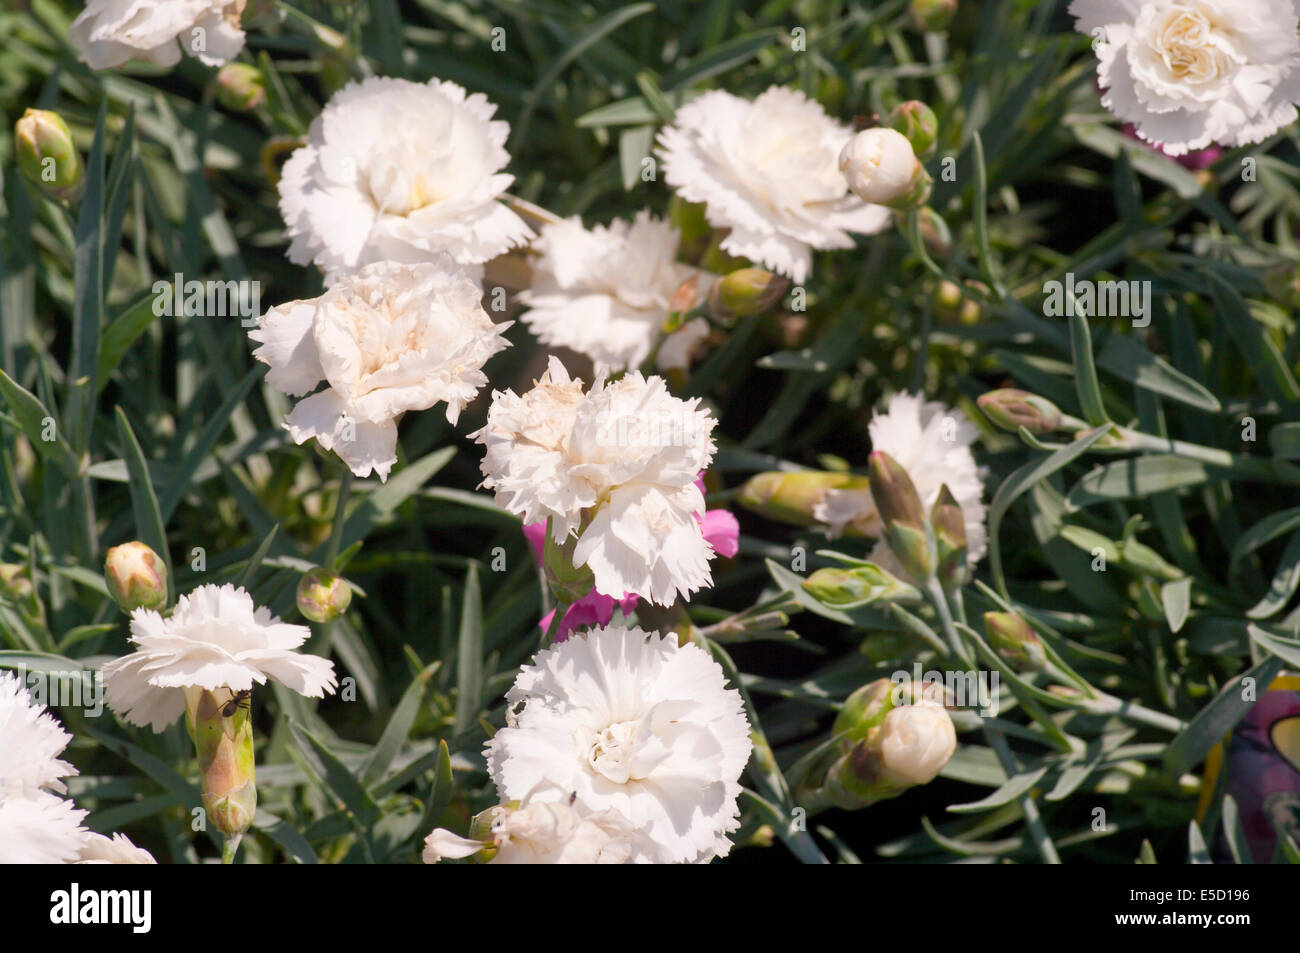 White Dianthus Caryophyllus ' Arctic Storm ' Commonly known as Garden Pinks Stock Photo